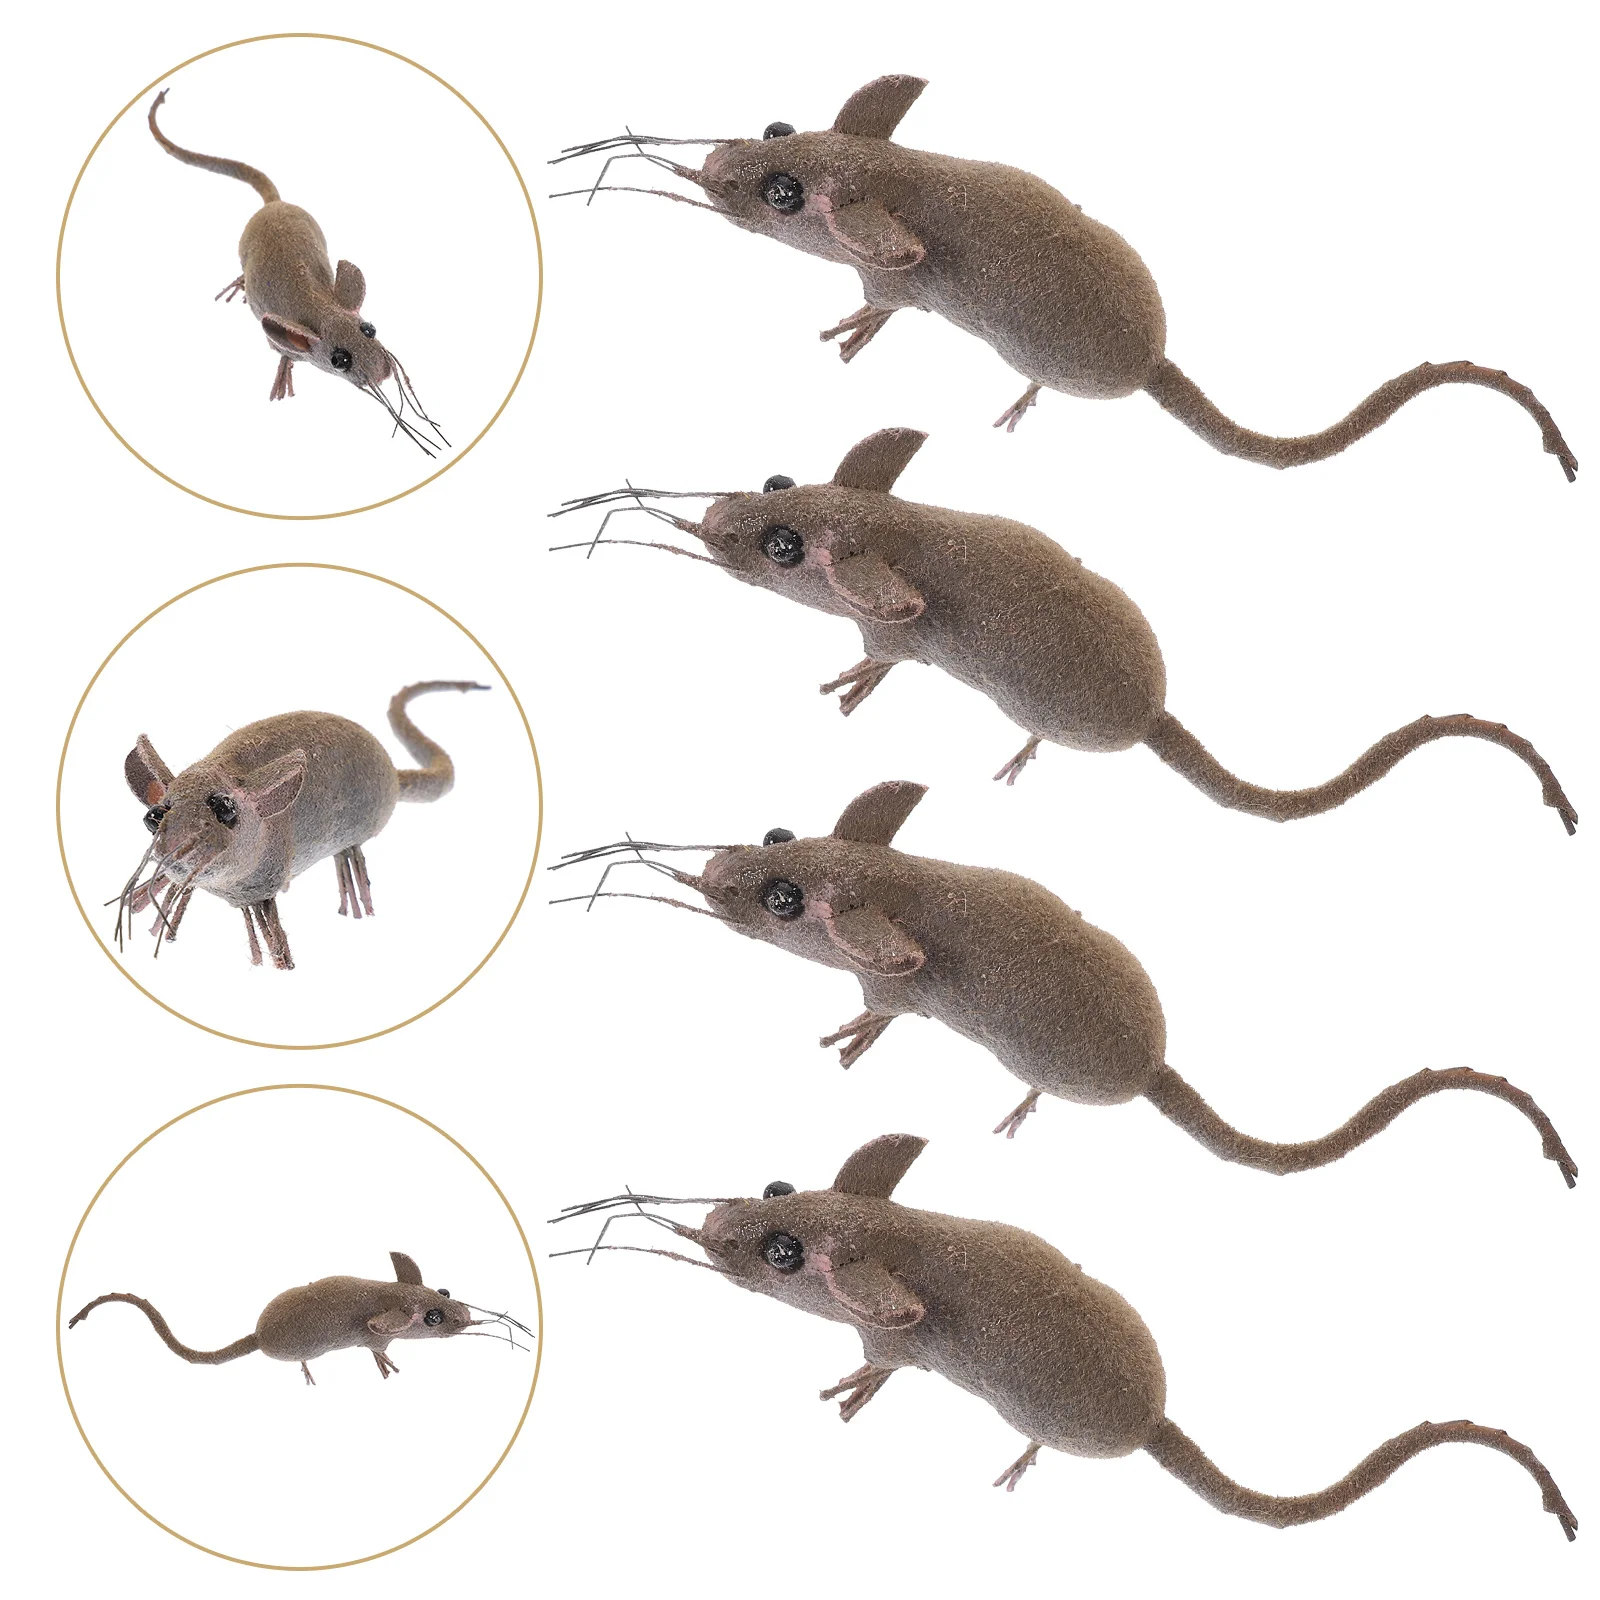 4 Pcs High Simulation Mouse Micro-landscape Decoration Teaching Model 4pcs Home Fake Iron Wire Halloween Imitation Mice for